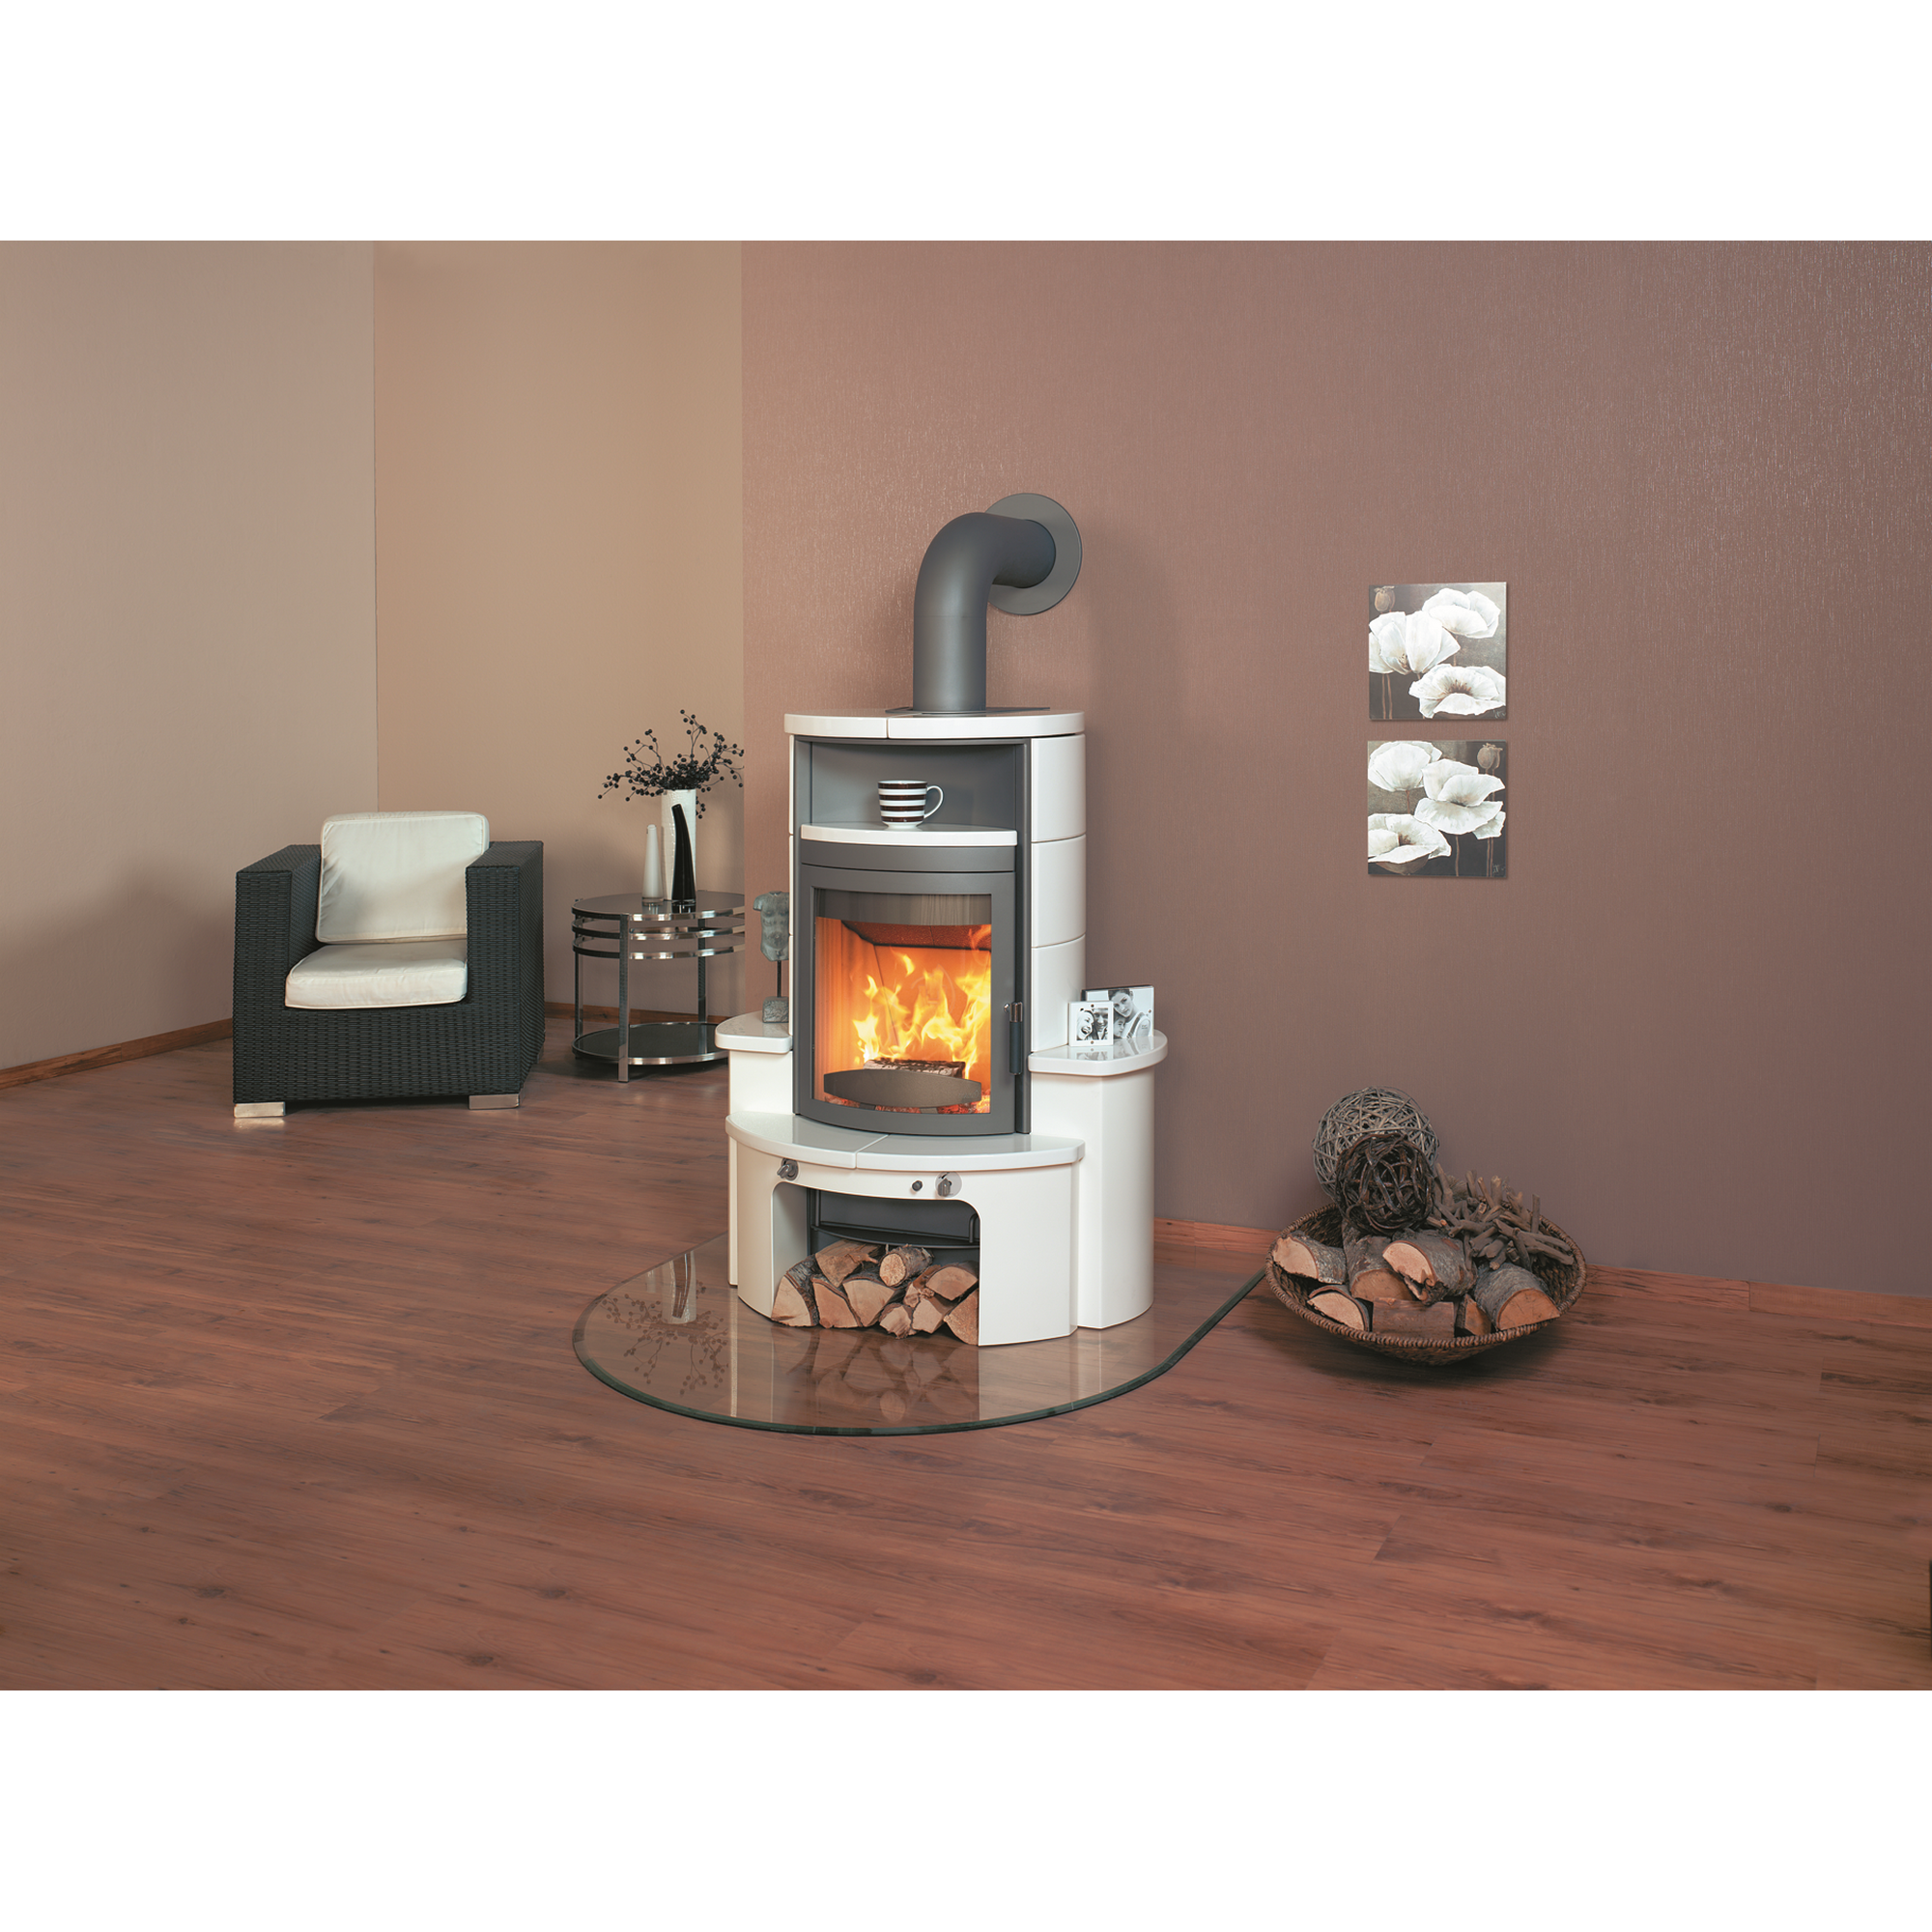 Kaminofen 'Avenso GT ECOplus' titan/creme-weiß 8 kW + product picture